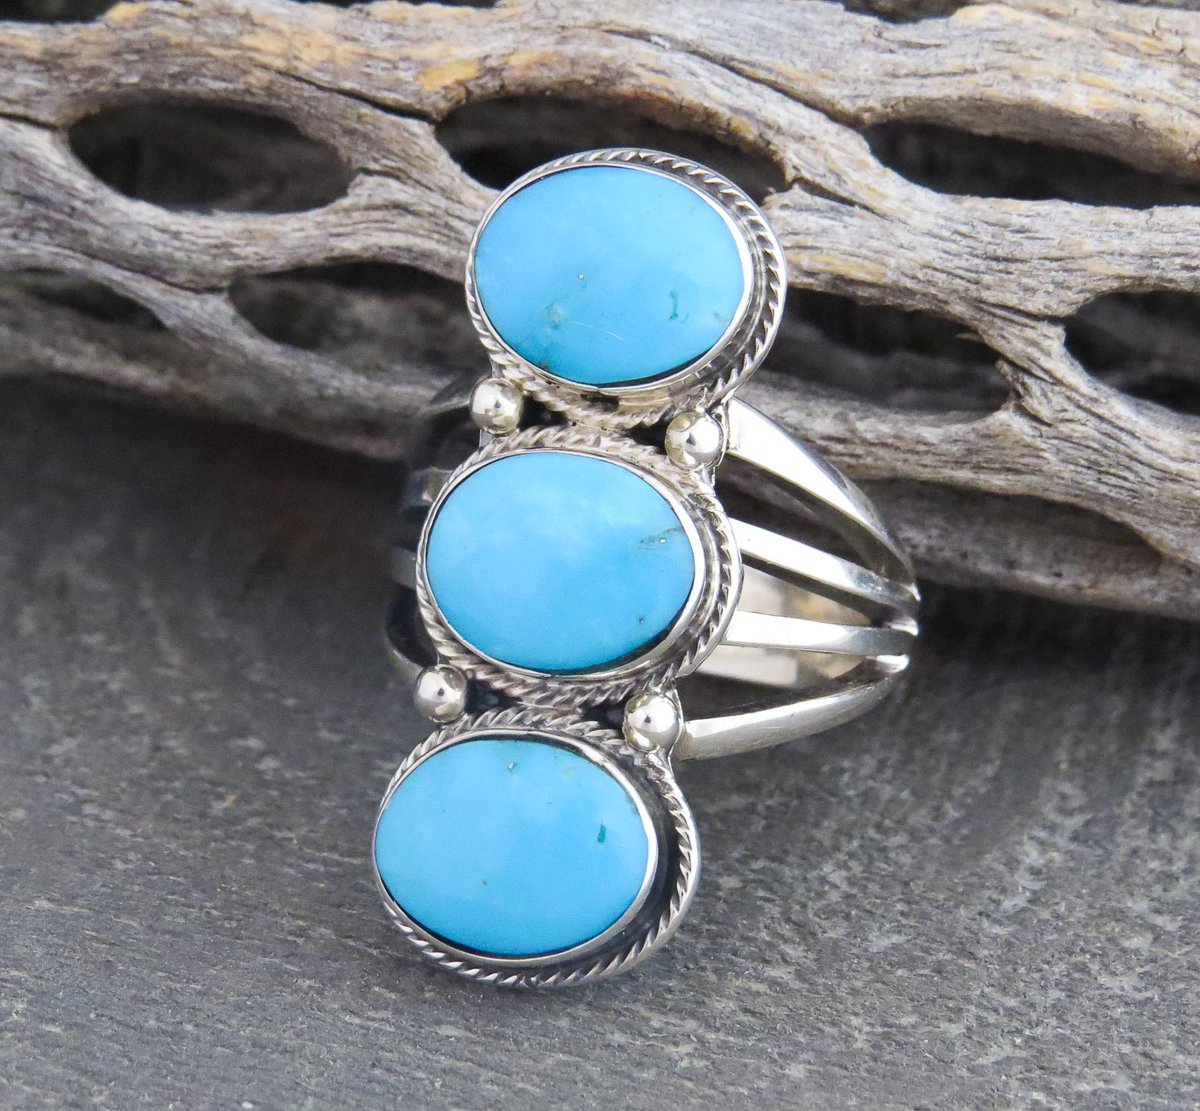 Turquoise Additions! #etsy shop: Turquoise Sterling Silver Long Ring etsy.me/2ZWCeId #jewelry #bluering southwesternjewelry #turquoisering #silver #giftforwomen #bohohippie #turquoisejewelry #statementring #uniquering #westernring #kokopellitraders #najavoring